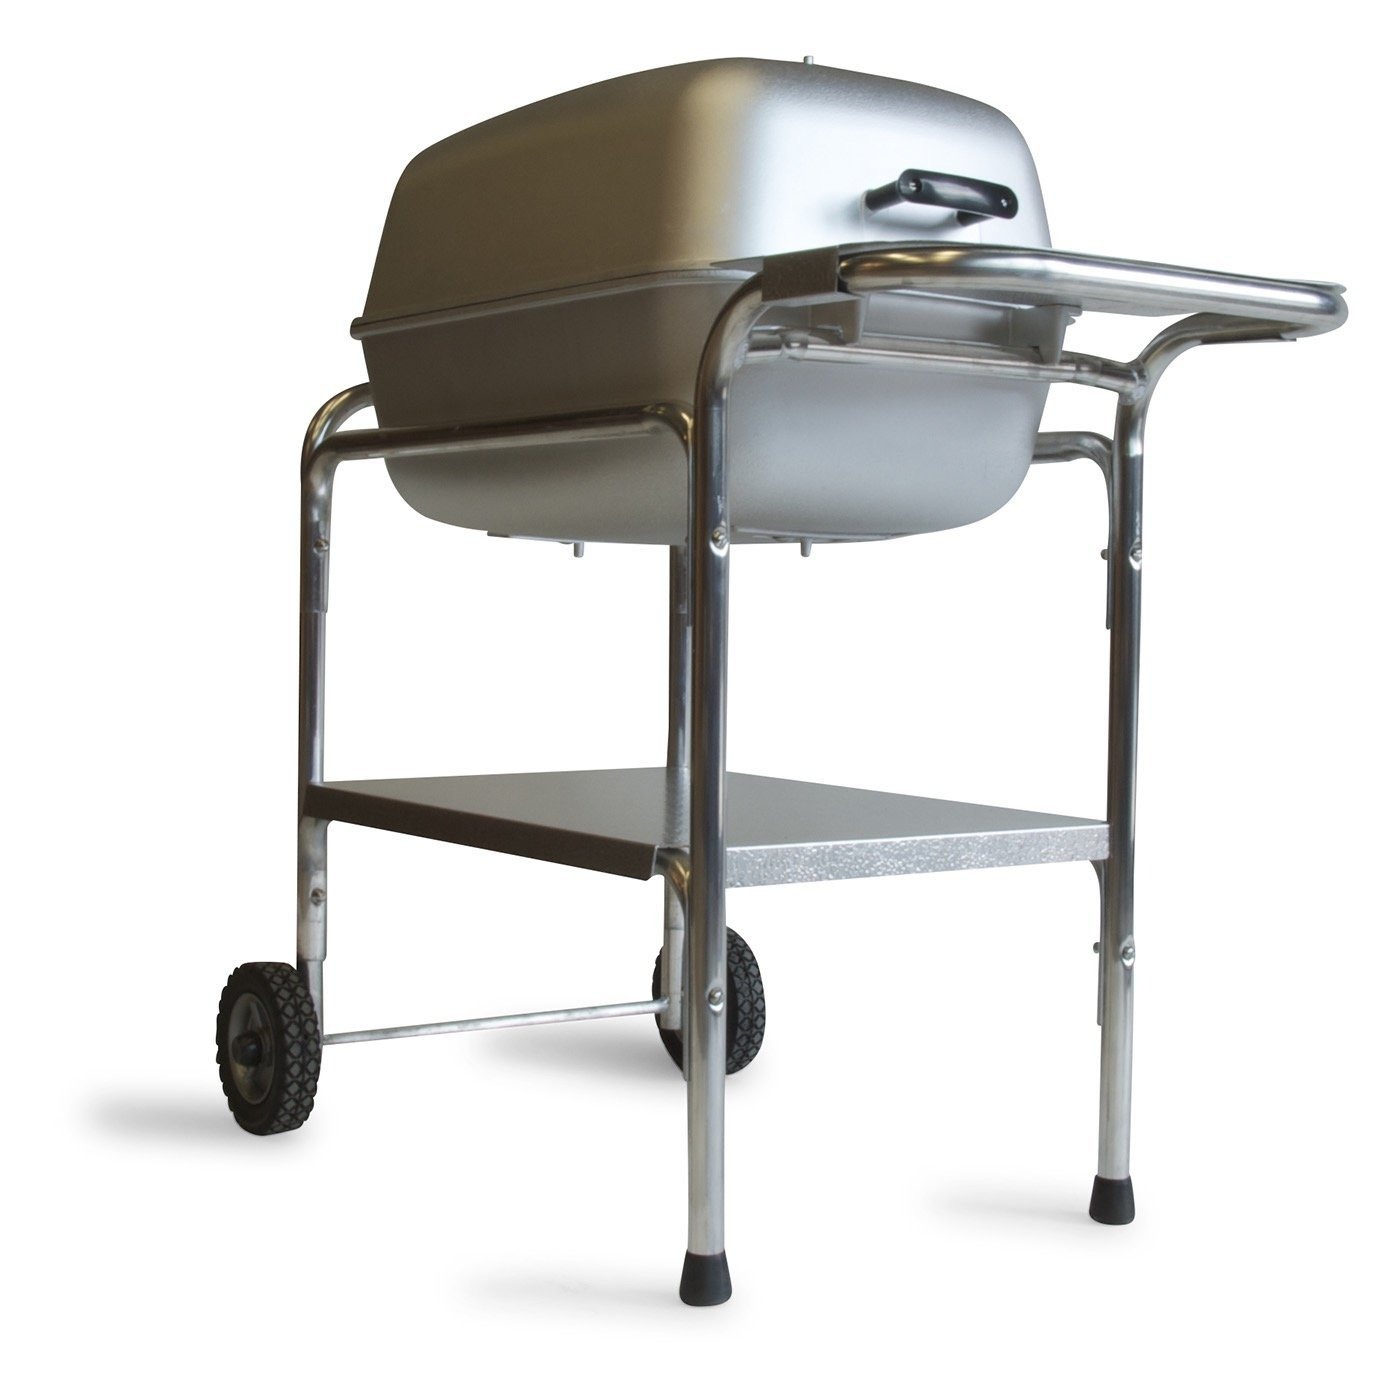 Top 4 Charcoal Grills That Work Great for Every American Home